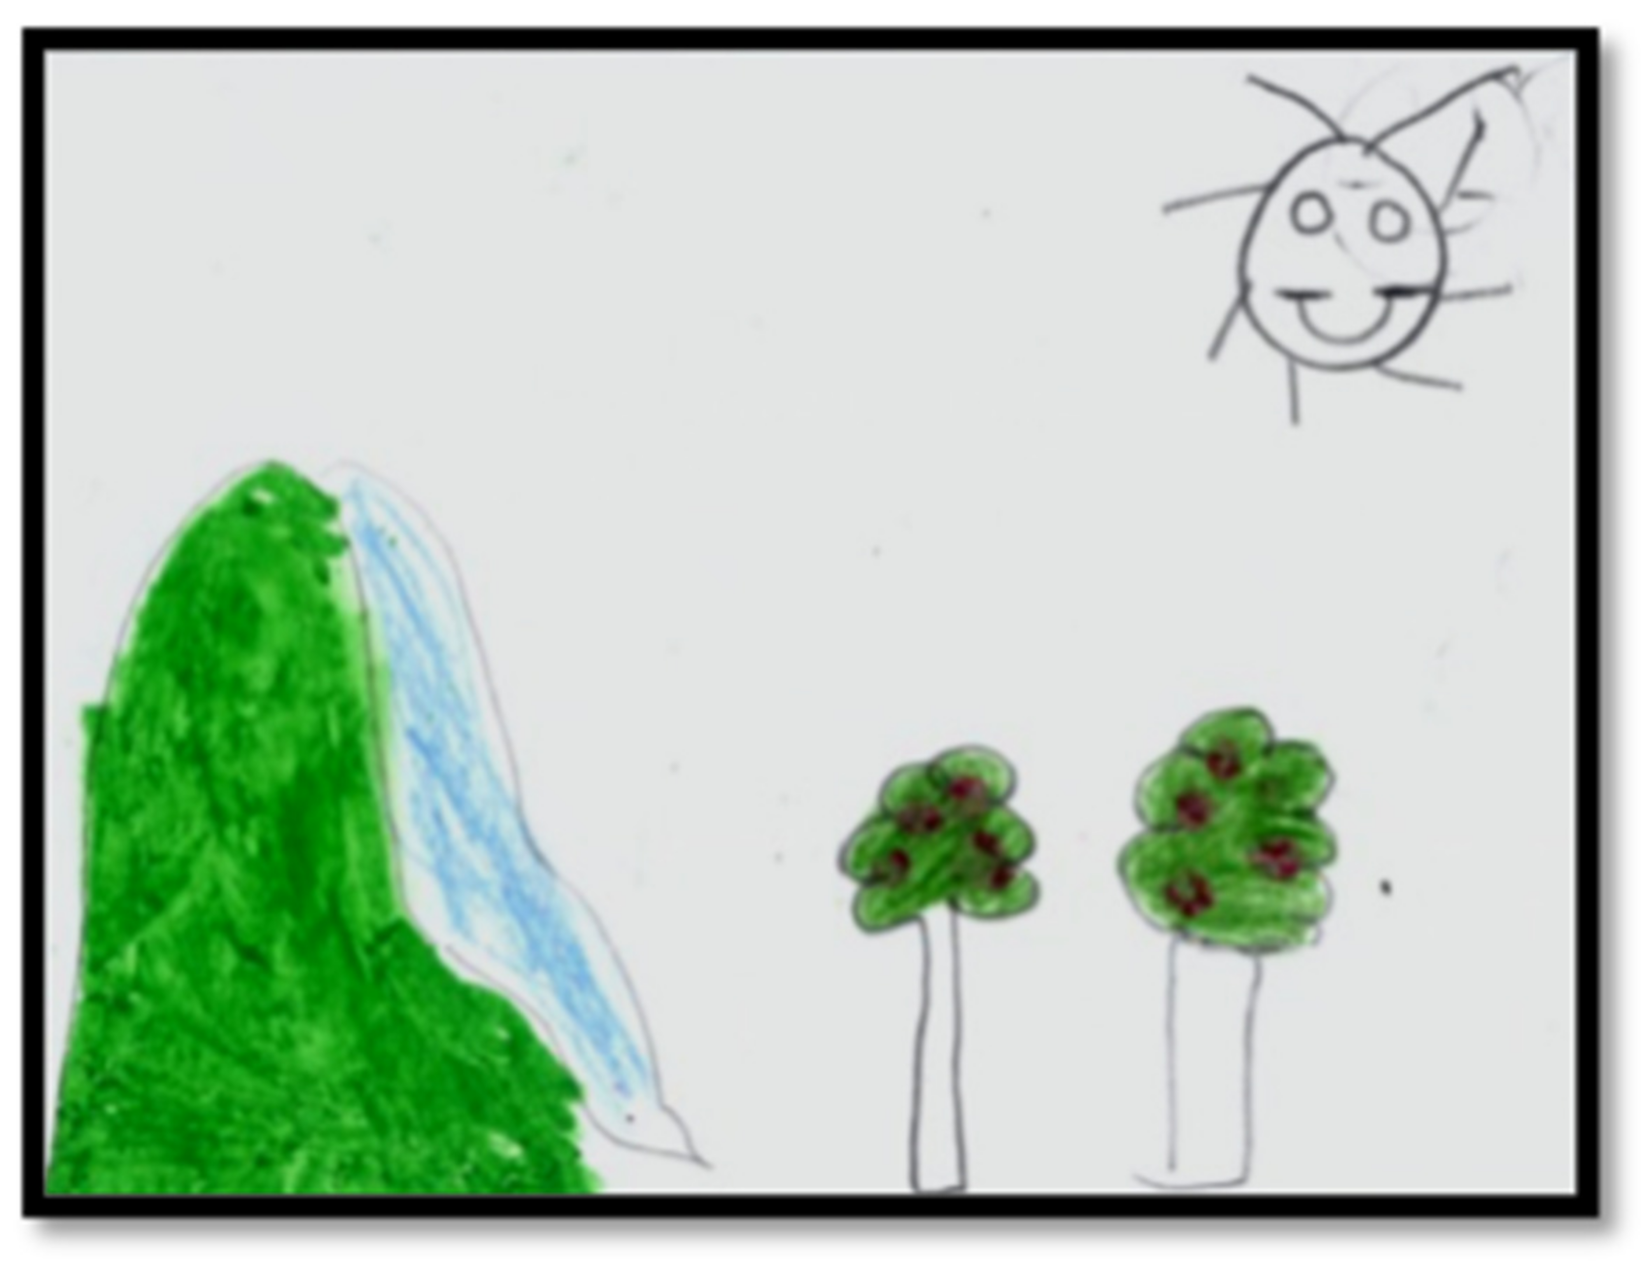 Kids' art from the farm: Connecting food, farming, and the environment |  Oxbow Farm & Conservation Center